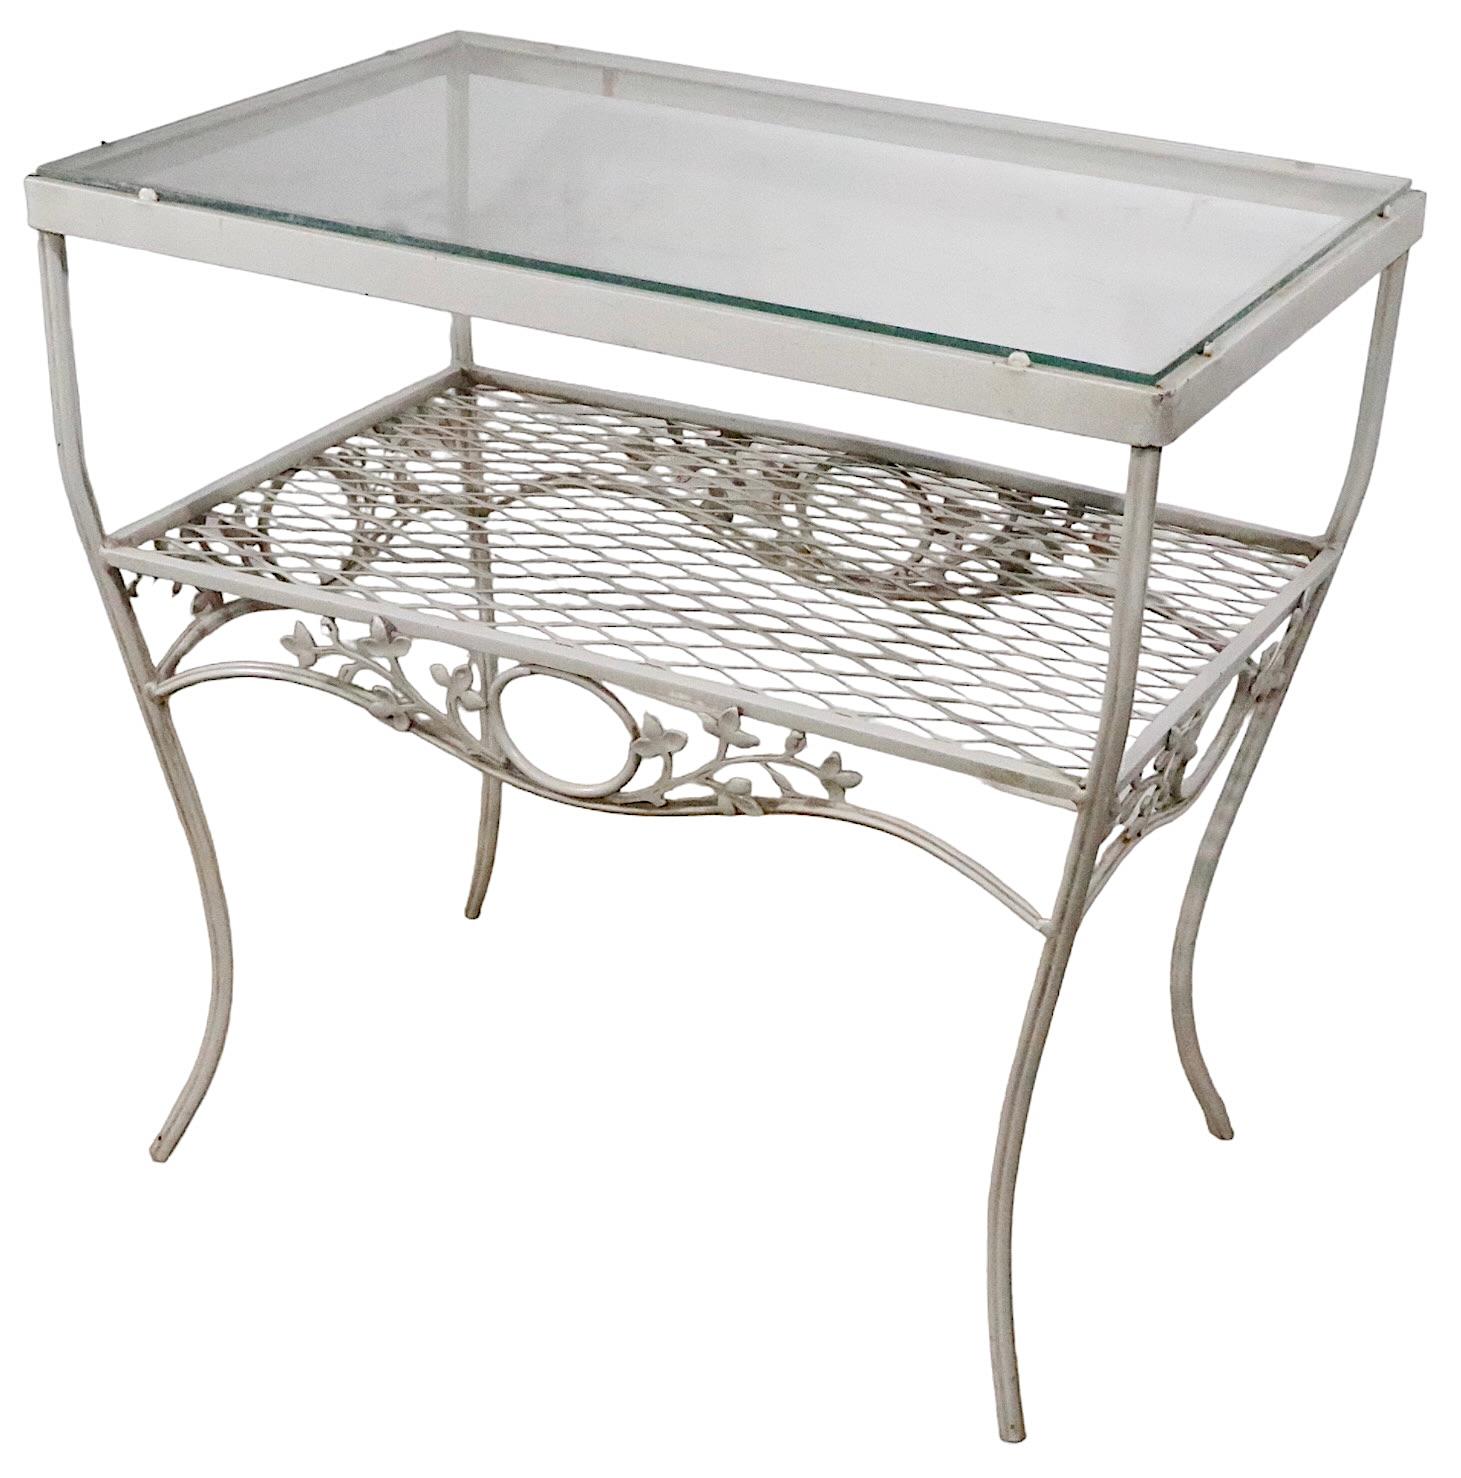 Wrought Iron and Glass Garden Patio Poolside End, Side Table Att. to Woodard In Good Condition For Sale In New York, NY